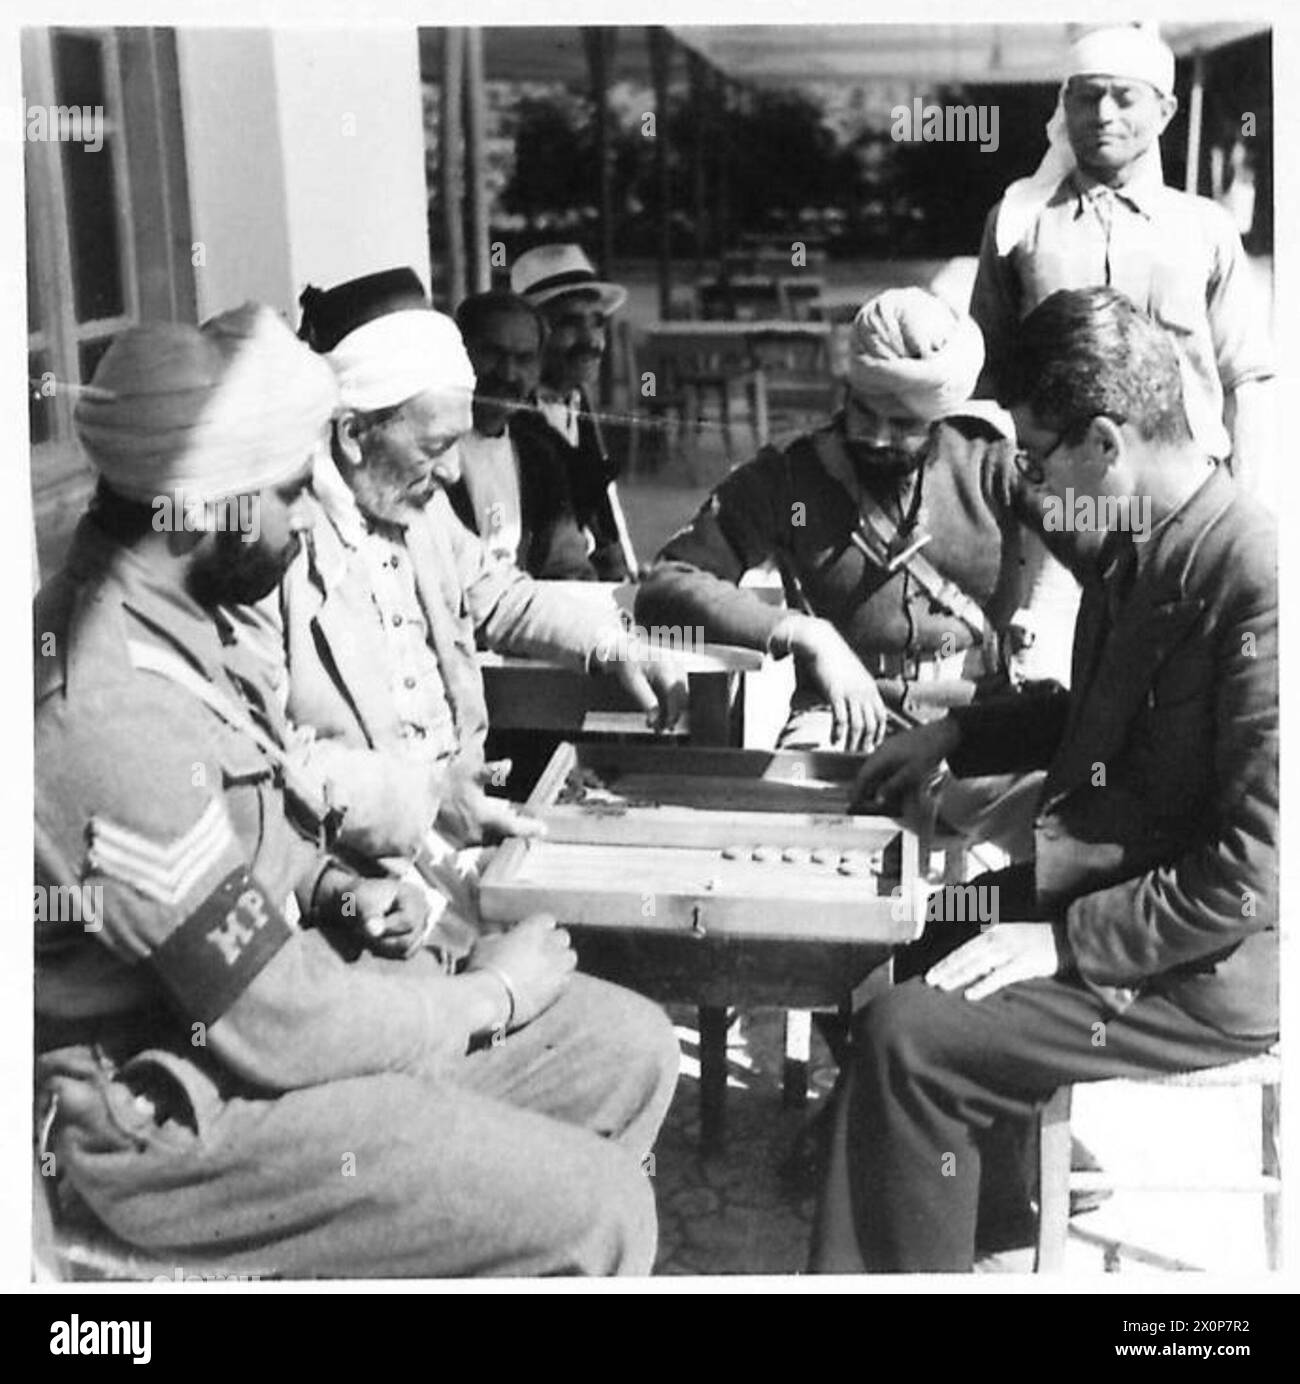 AMONG THE TROOPS IN CYPRUS - Indians in Cyprus watching a game of Tavli being played by Greeks. Photographic negative , British Army Stock Photo